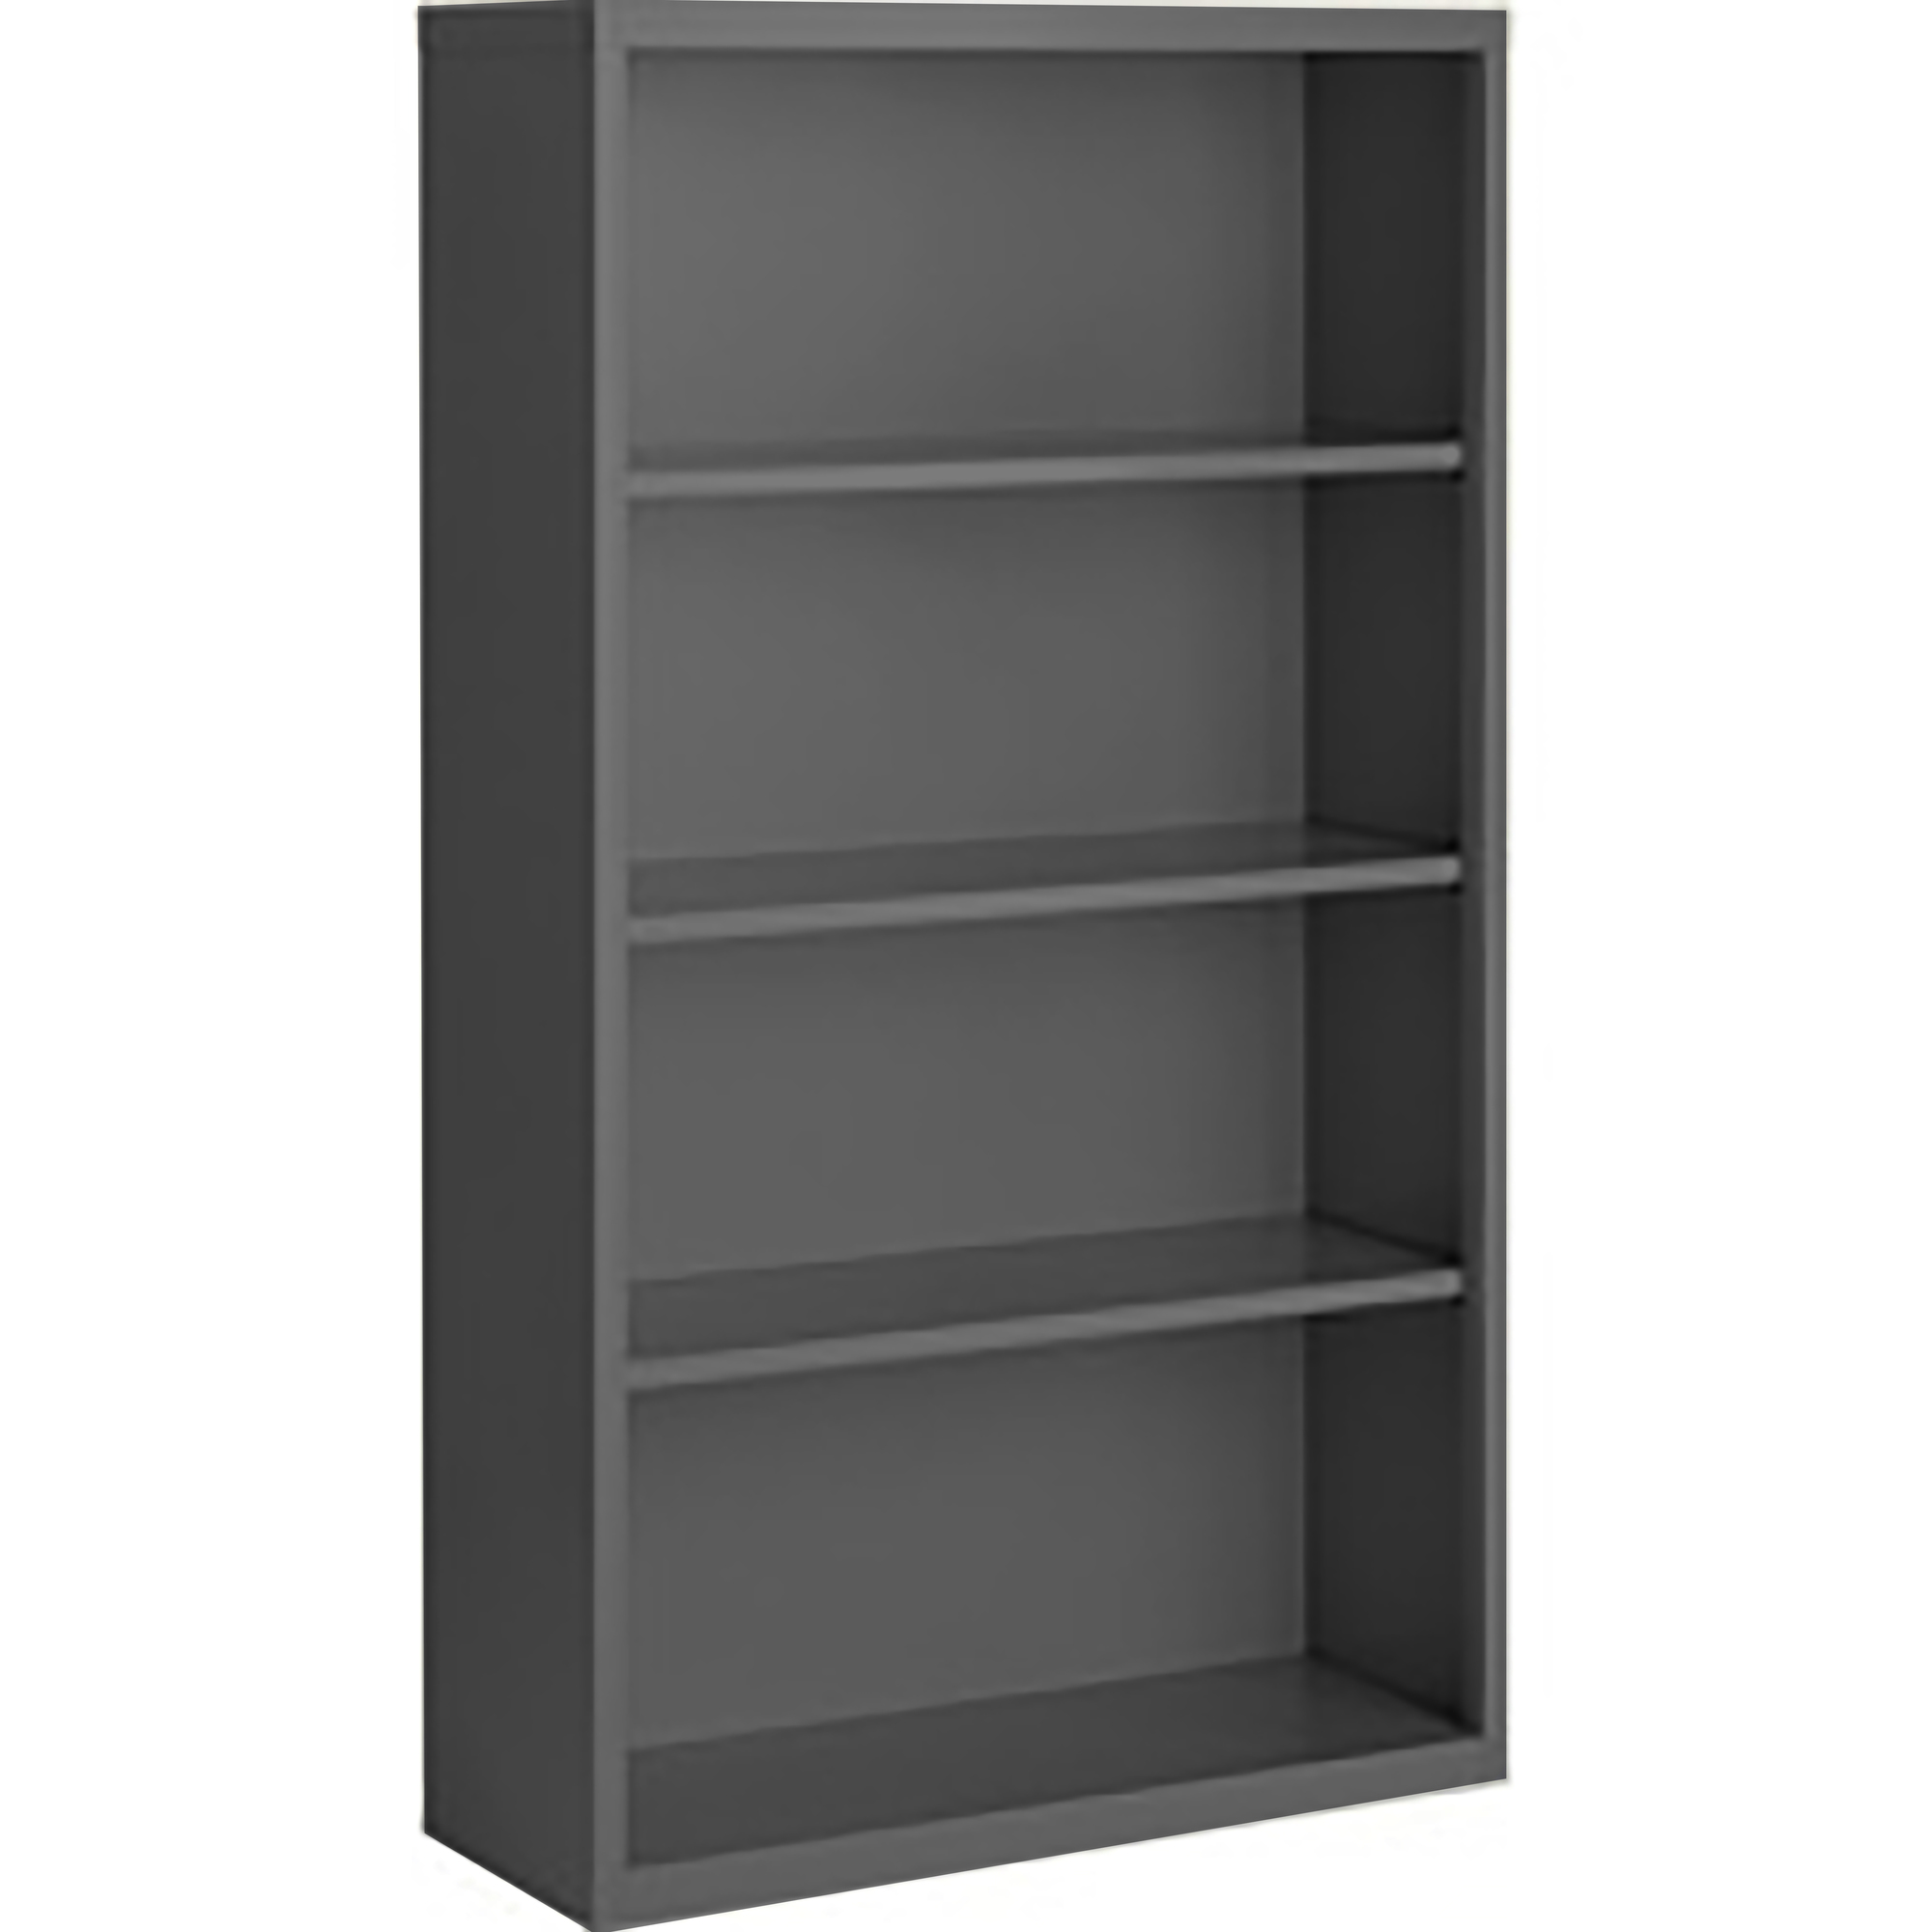 Steel Cabinets USA, 36Inchx18Inchx52Inch Charcoal Bookcase Steel Full Assembled, Height 52 in, Shelves (qty.) 4, Material Steel, Model BCA-365218-C